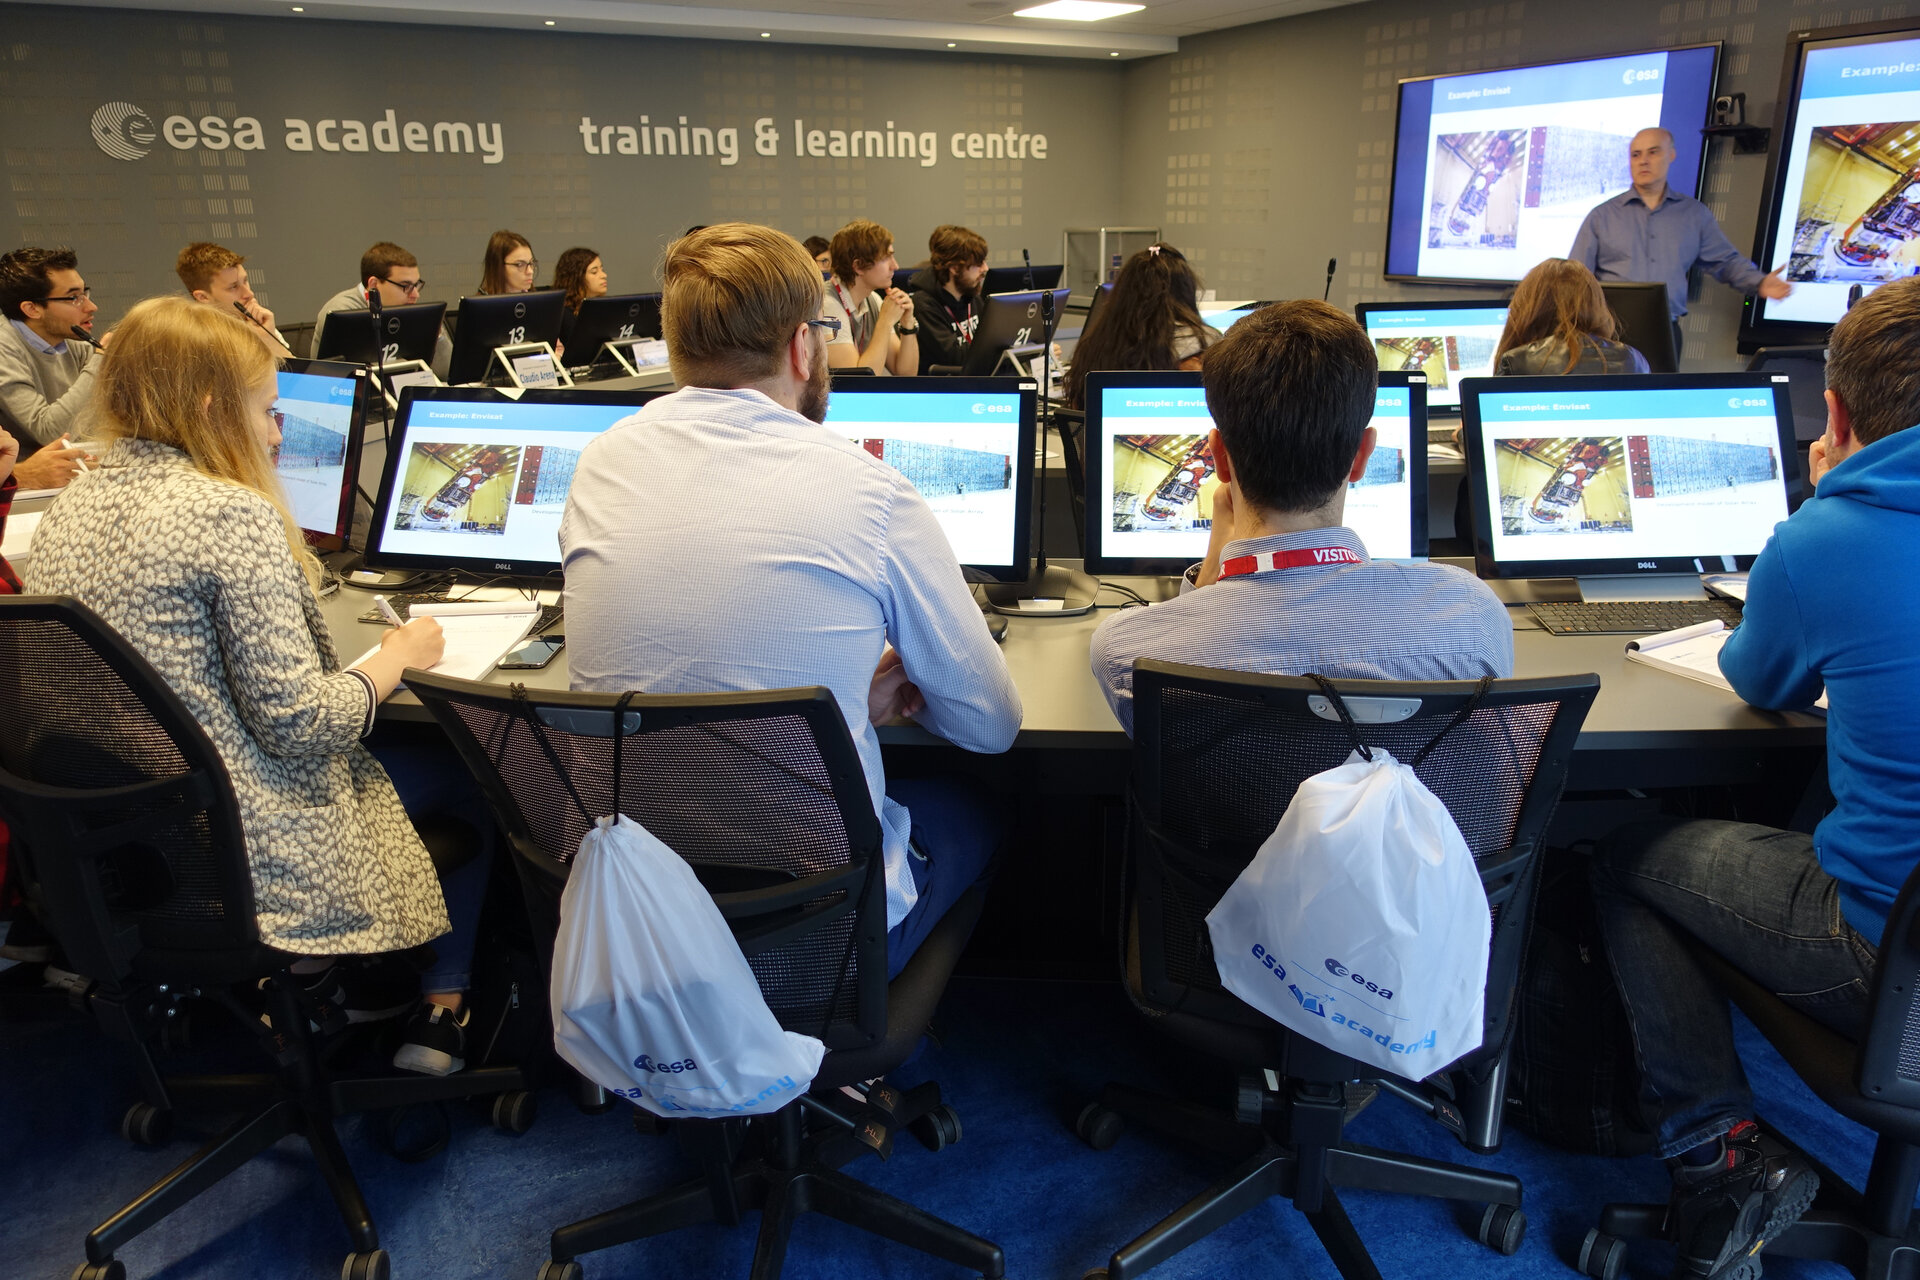 Students during last year’s training course in the Training & Learning Centre